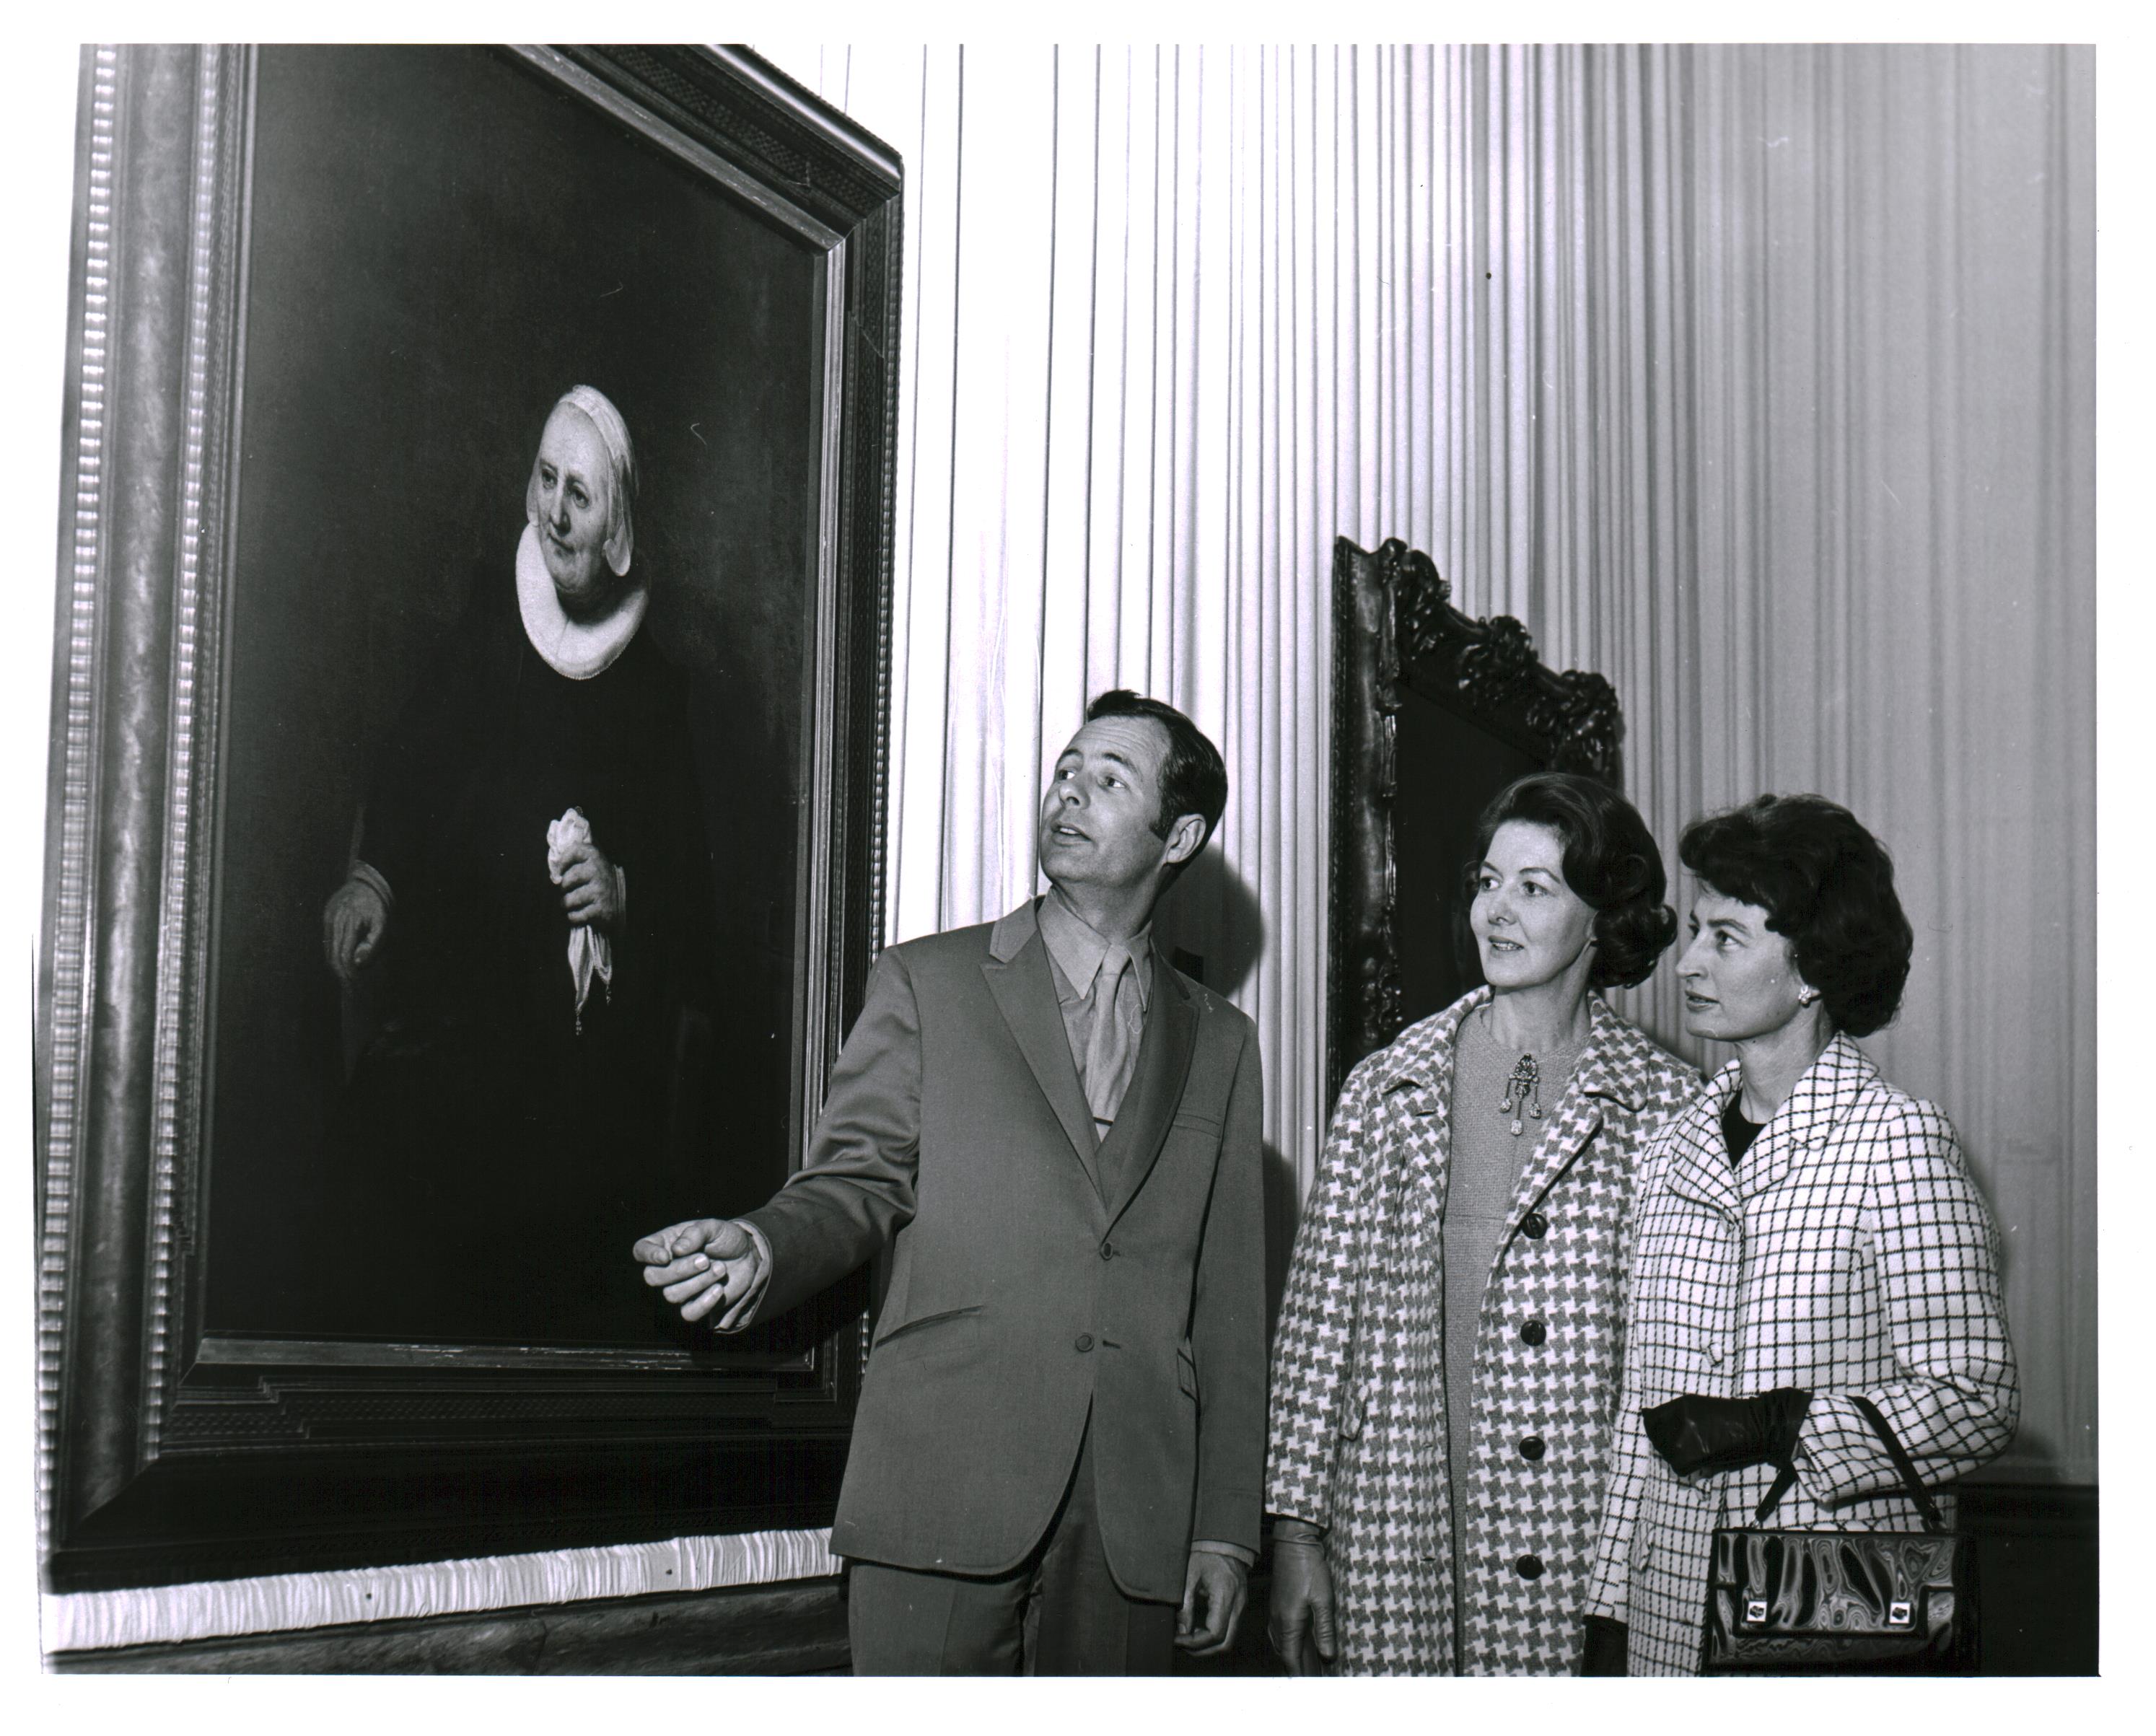 Bill Withrow, unidentified woman and Mrs. W.R. Allen viewing Portrait of a Seated Woman with a Handkerchief